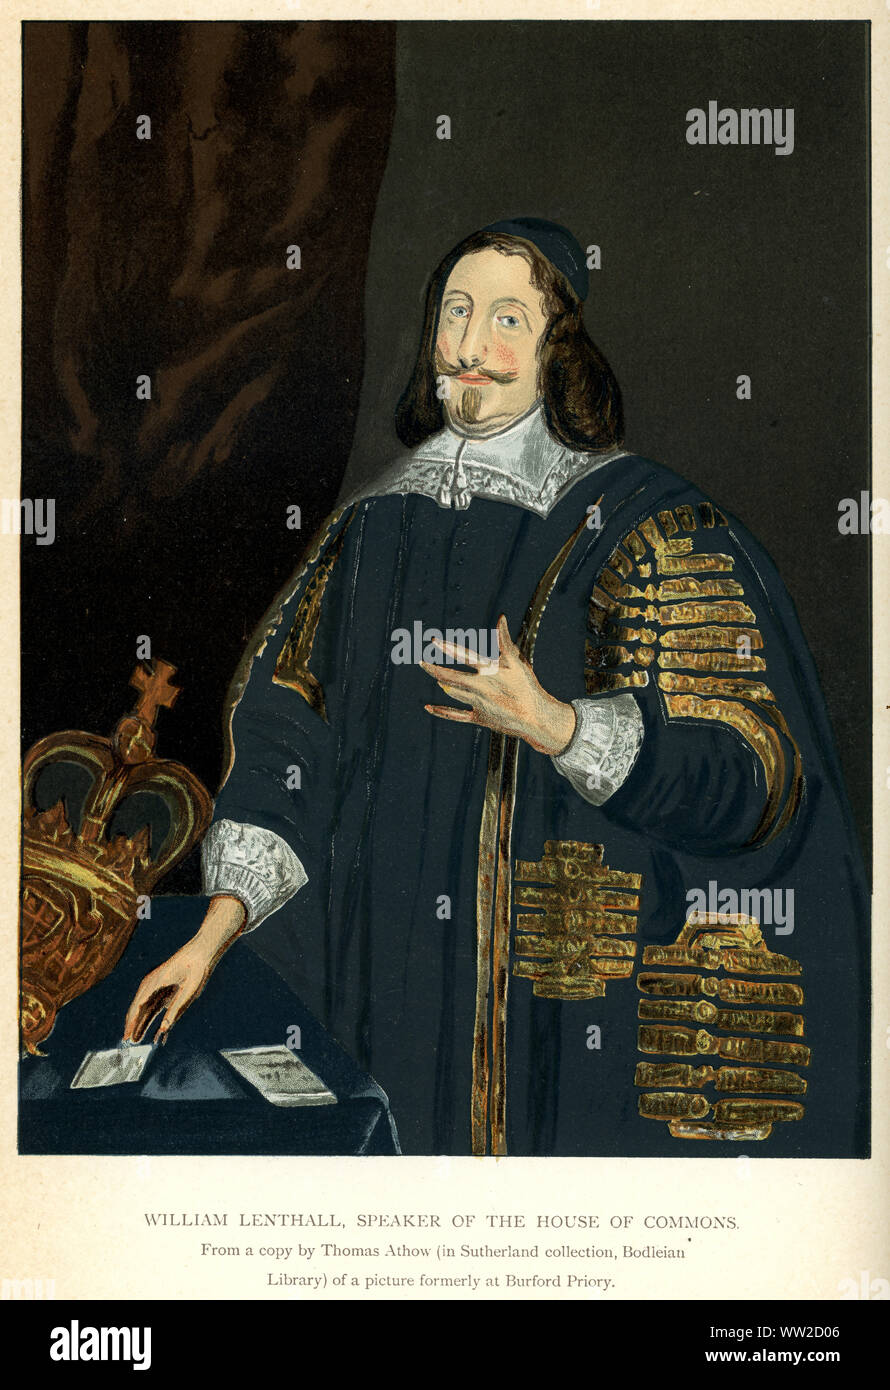 William Lenthall (1591–1662) was an English politician of the Civil War period. He served as Speaker of the House of Commons for a period of almost twenty years, both before and after the execution of King Charles I. Stock Photo